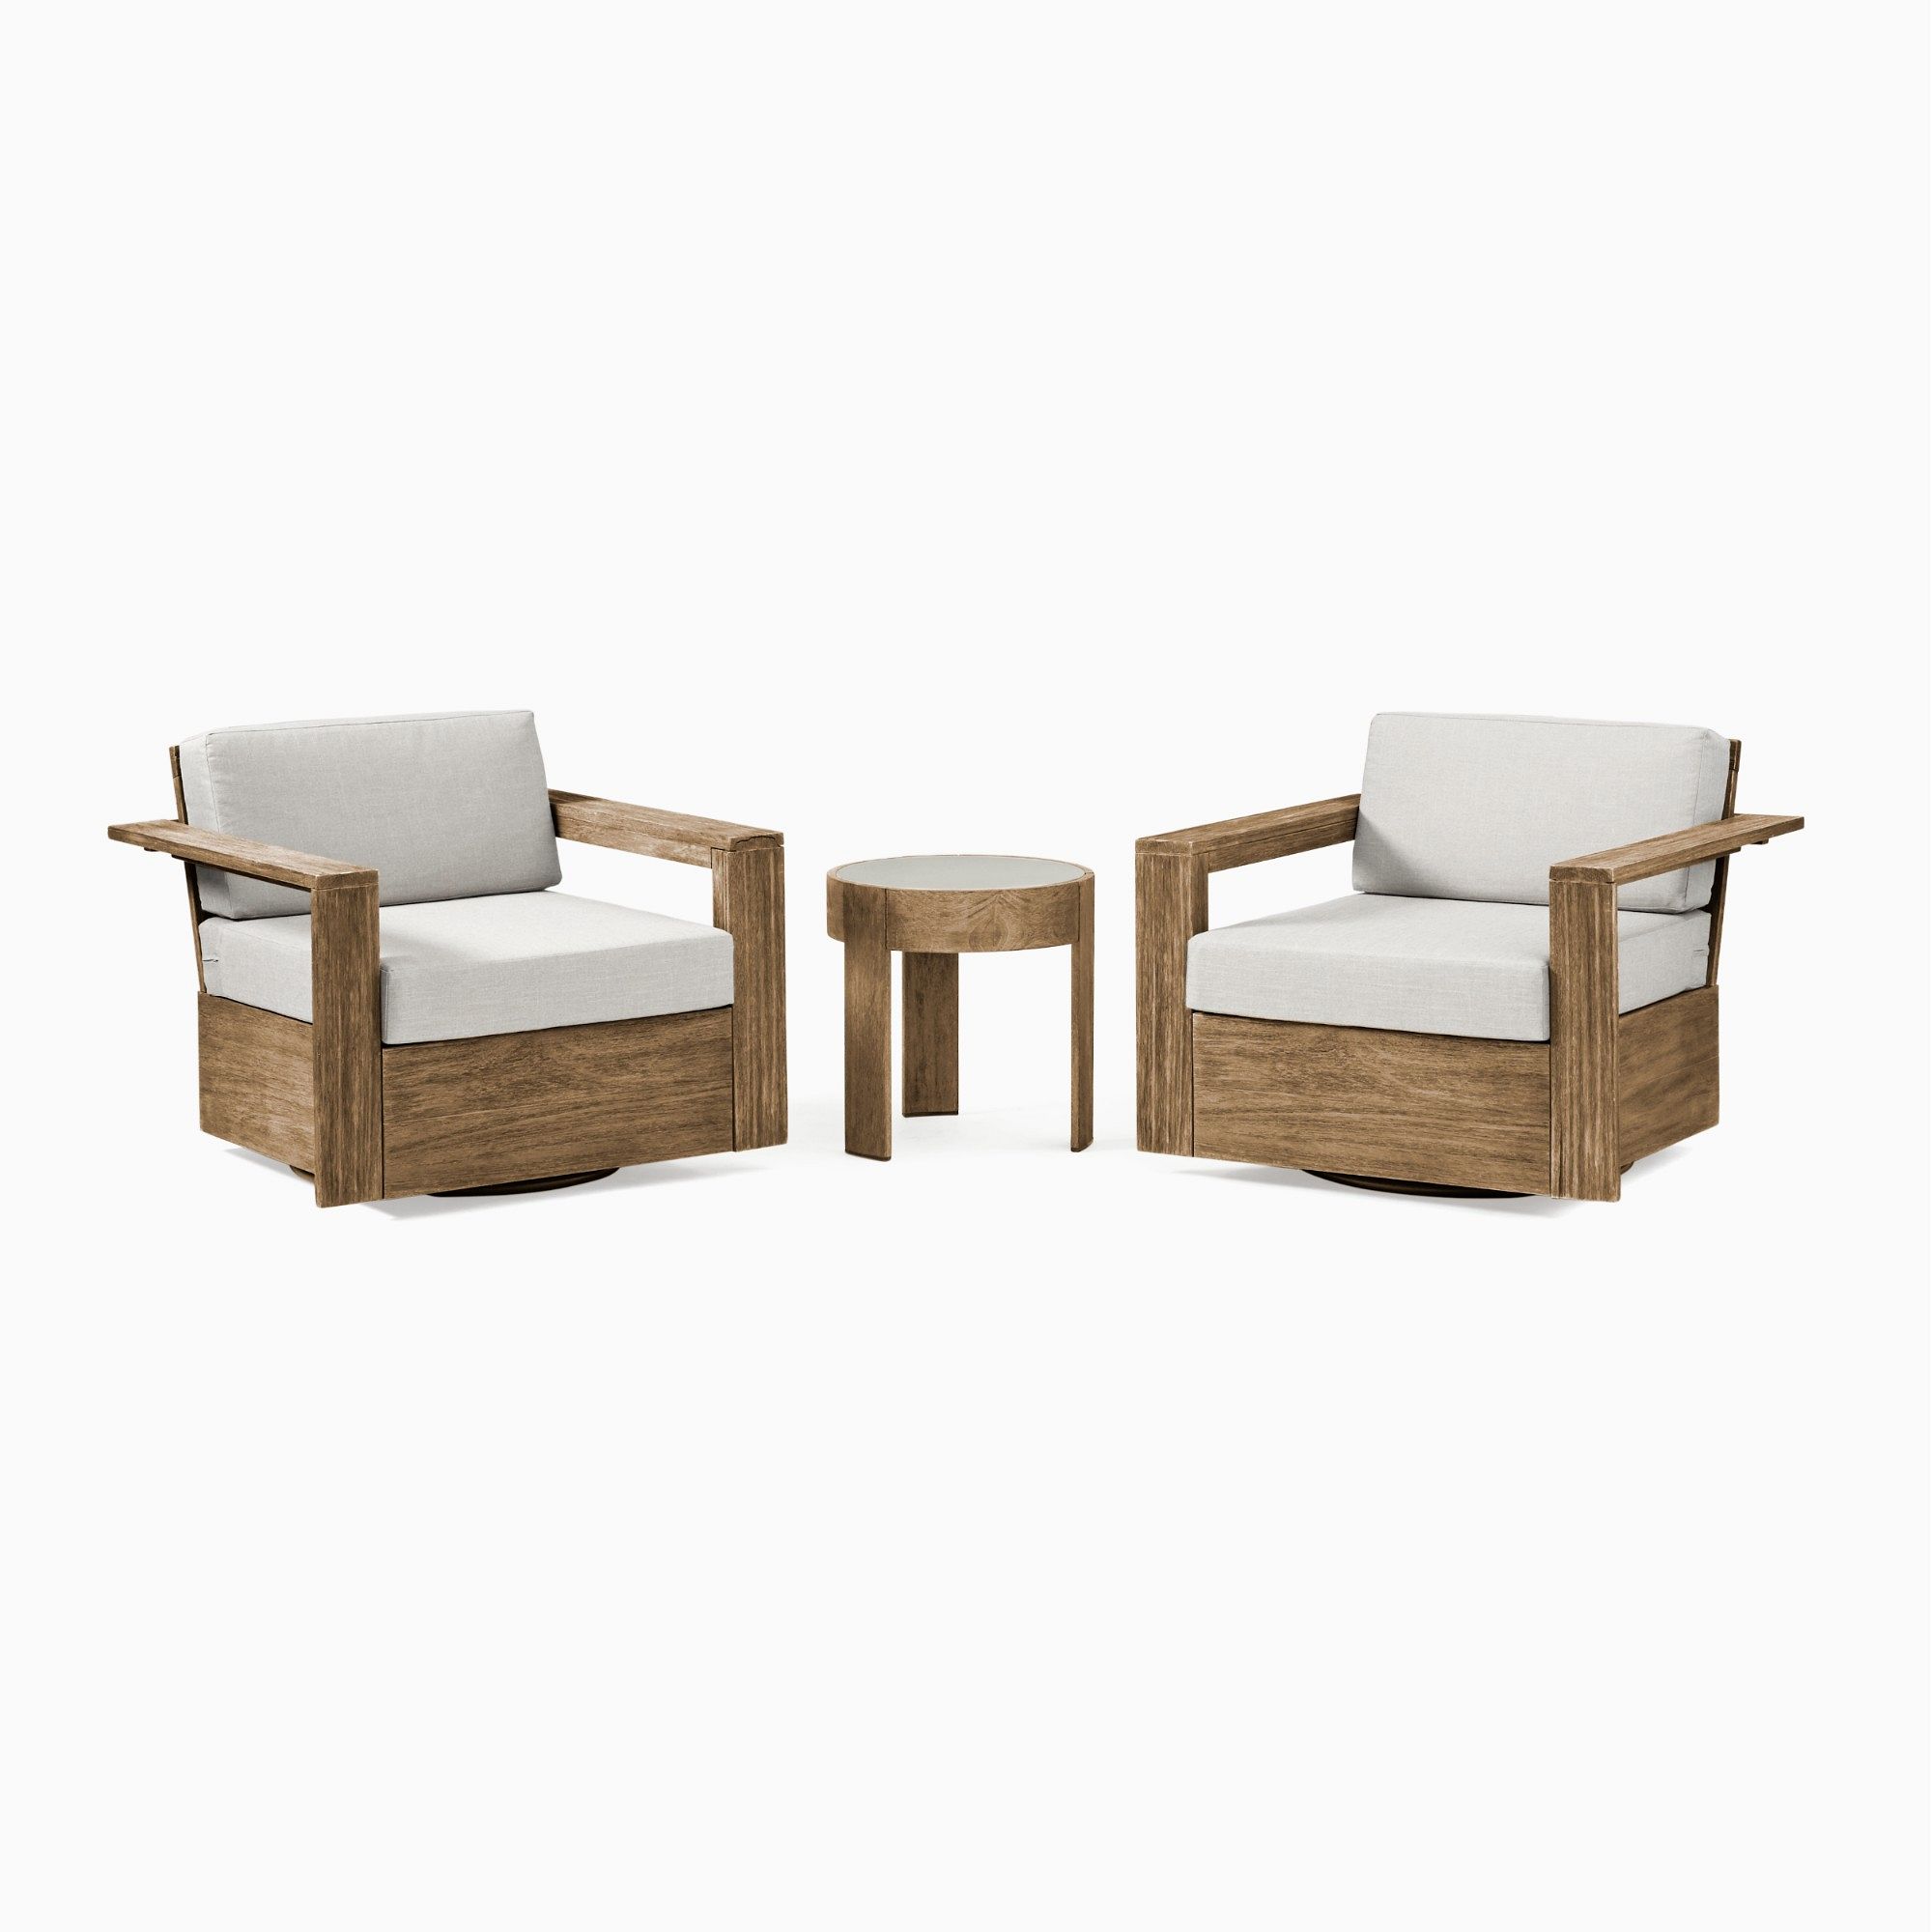 Portside Wood Outdoor Swivel Chairs & Round Side Table Set | West Elm